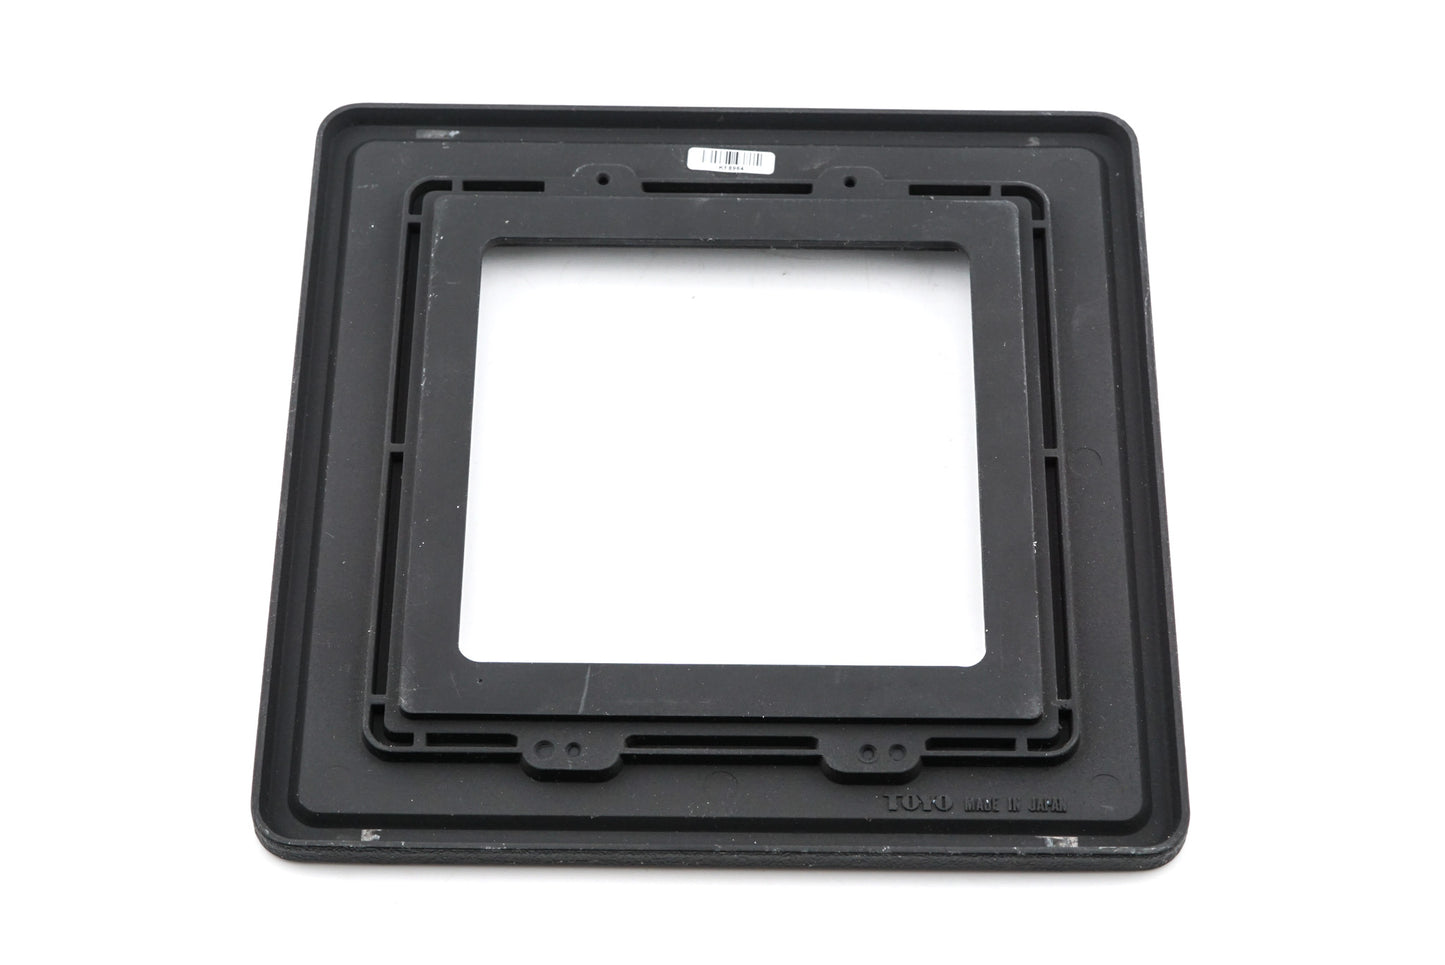 Toyo Adapter Board 158mm x 158mm To Accept 110mm x 110mm Lens Boards